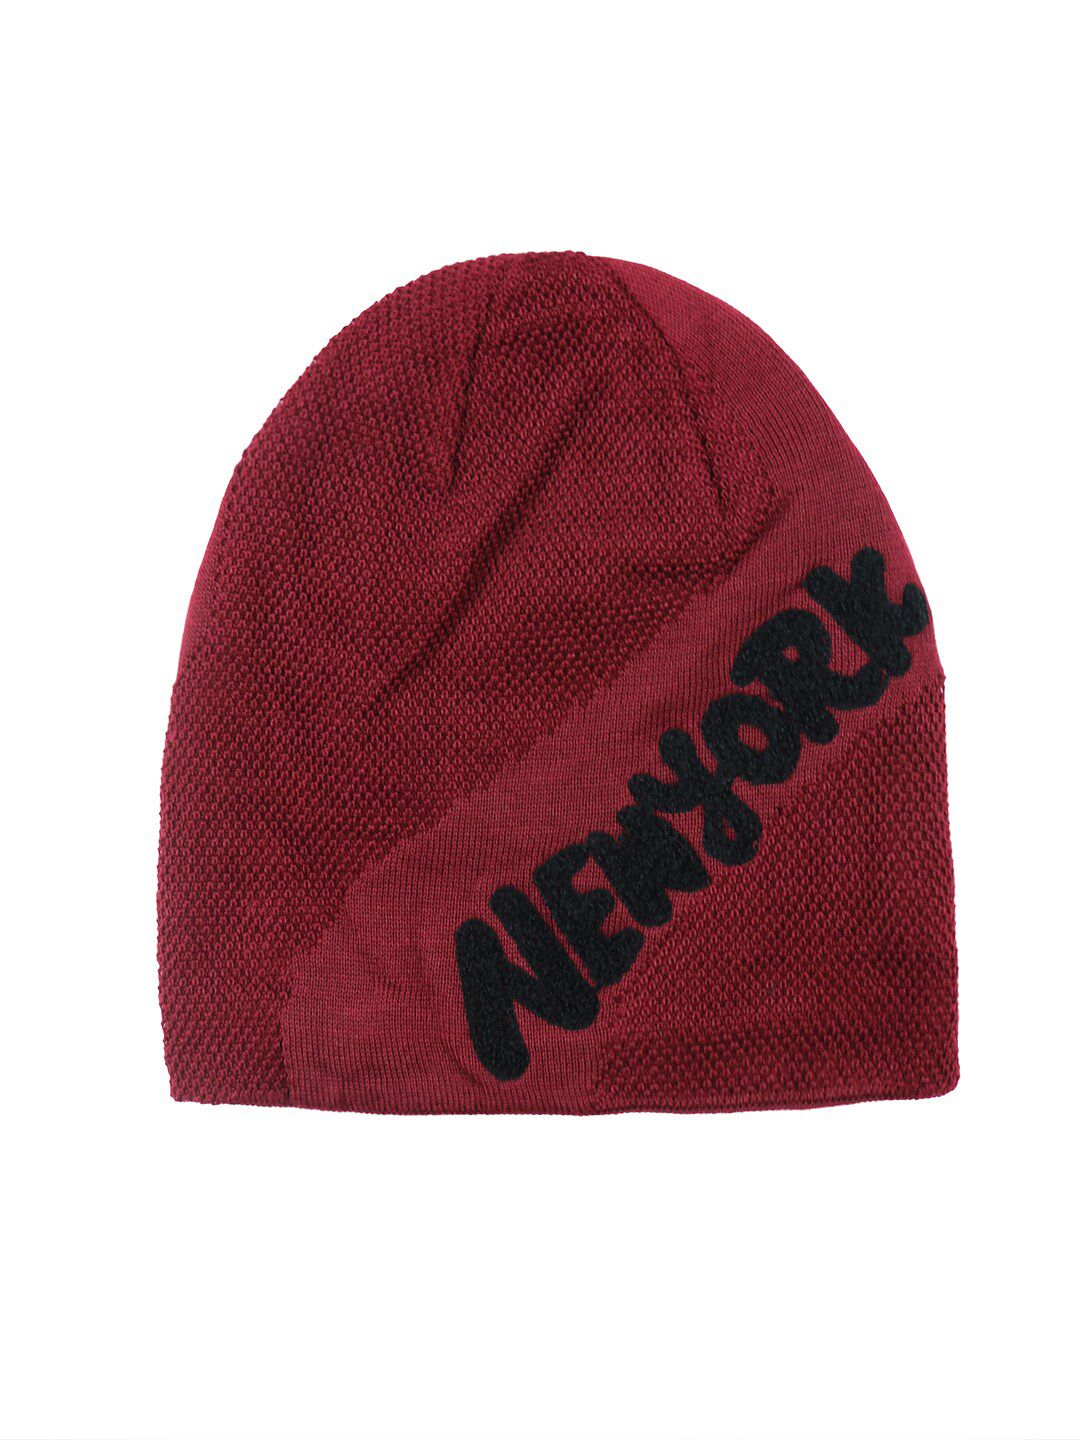 iSWEVEN Unisex Red & Black Woolen Beanie Price in India